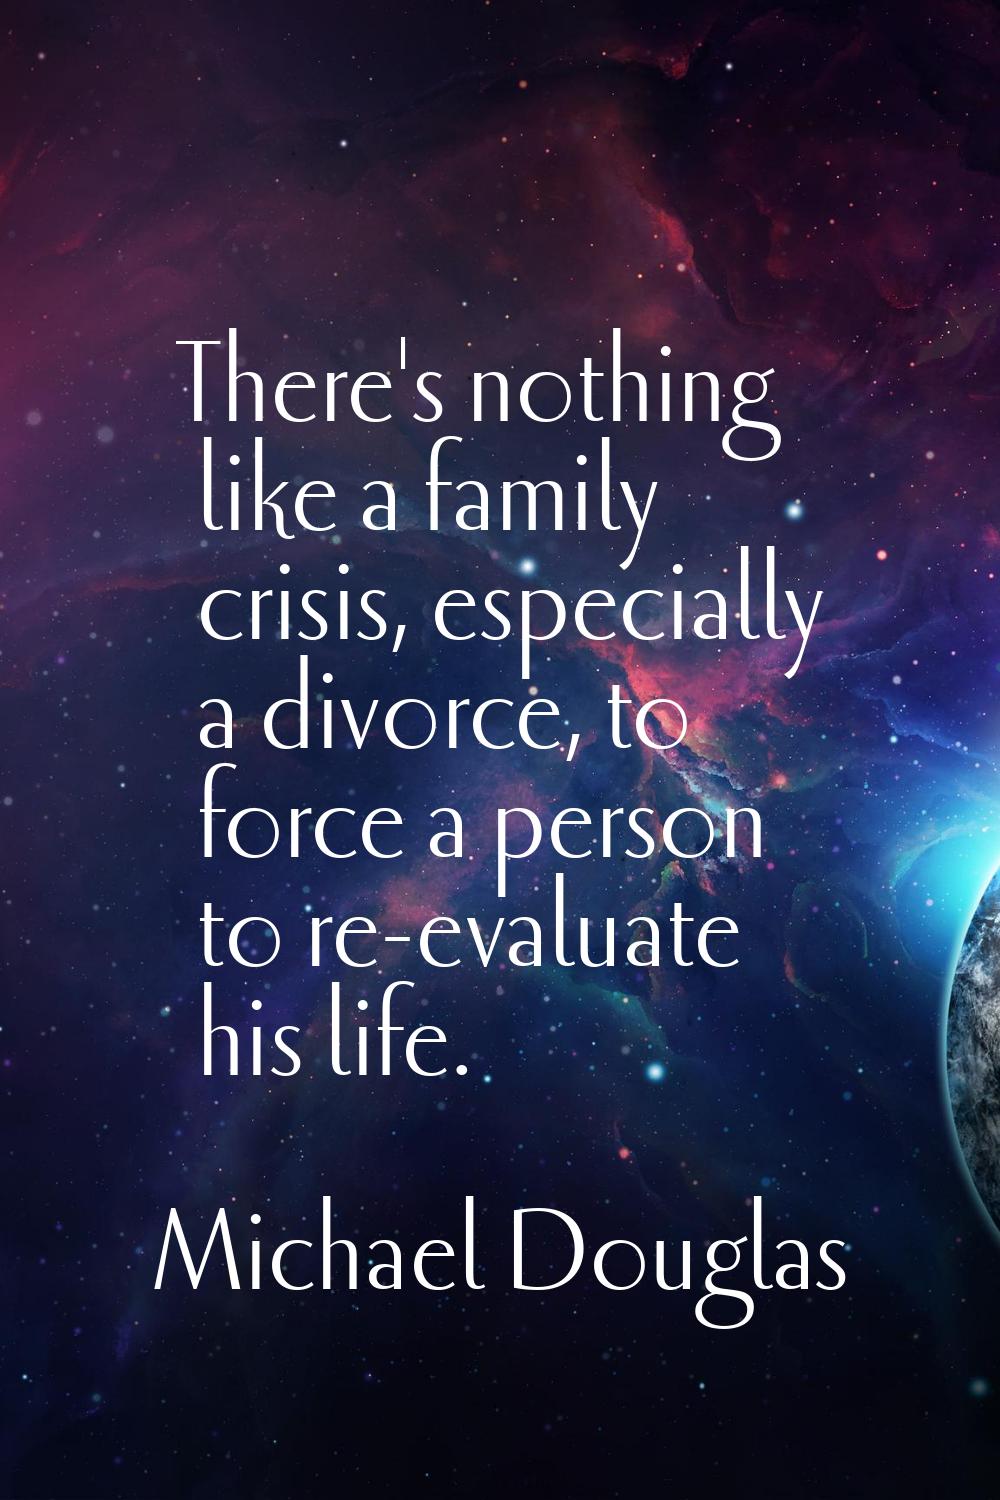 There's nothing like a family crisis, especially a divorce, to force a person to re-evaluate his li